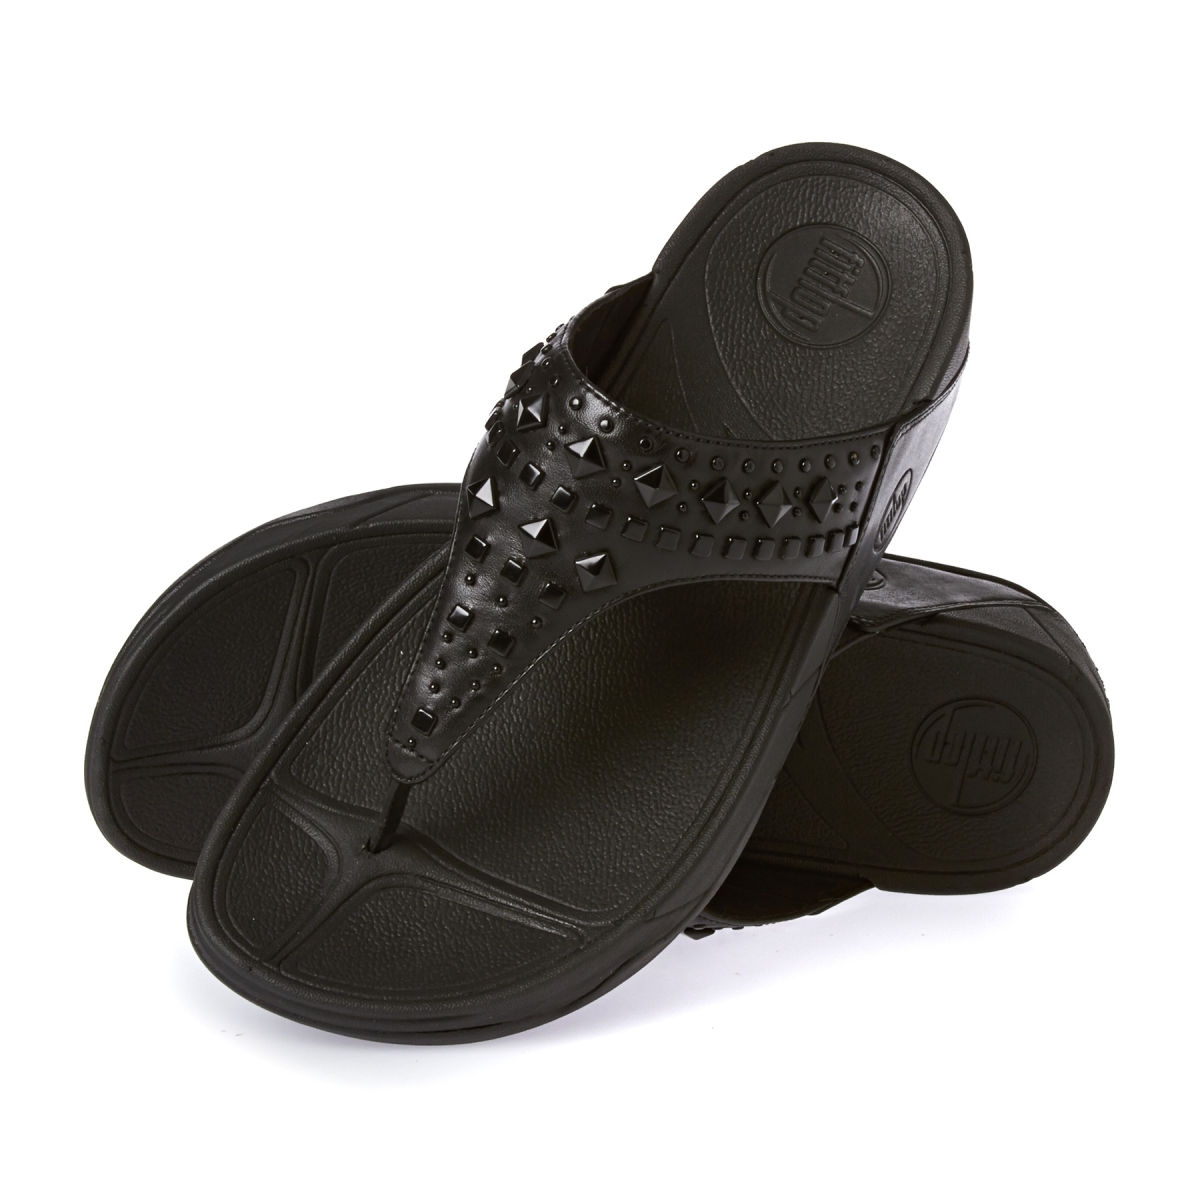 fitflop-sandals-fitflop-biker-chic-sandals-all-black